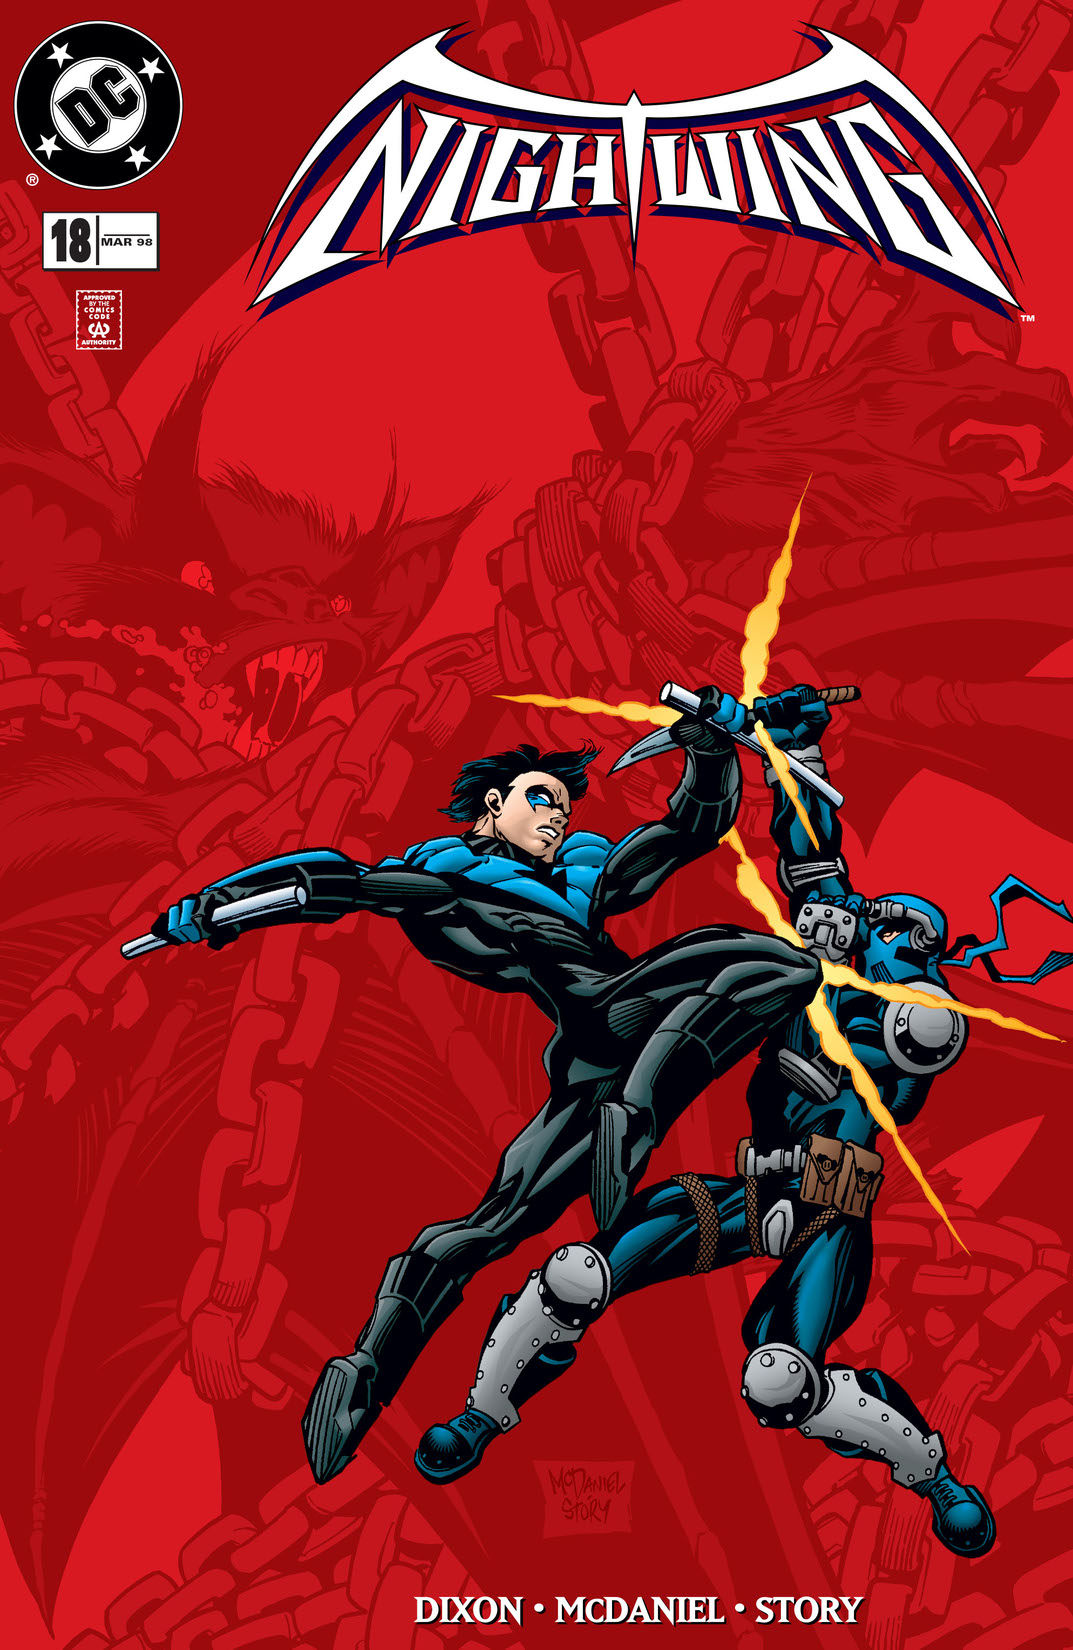 Nightwing (1996-) #18 preview images